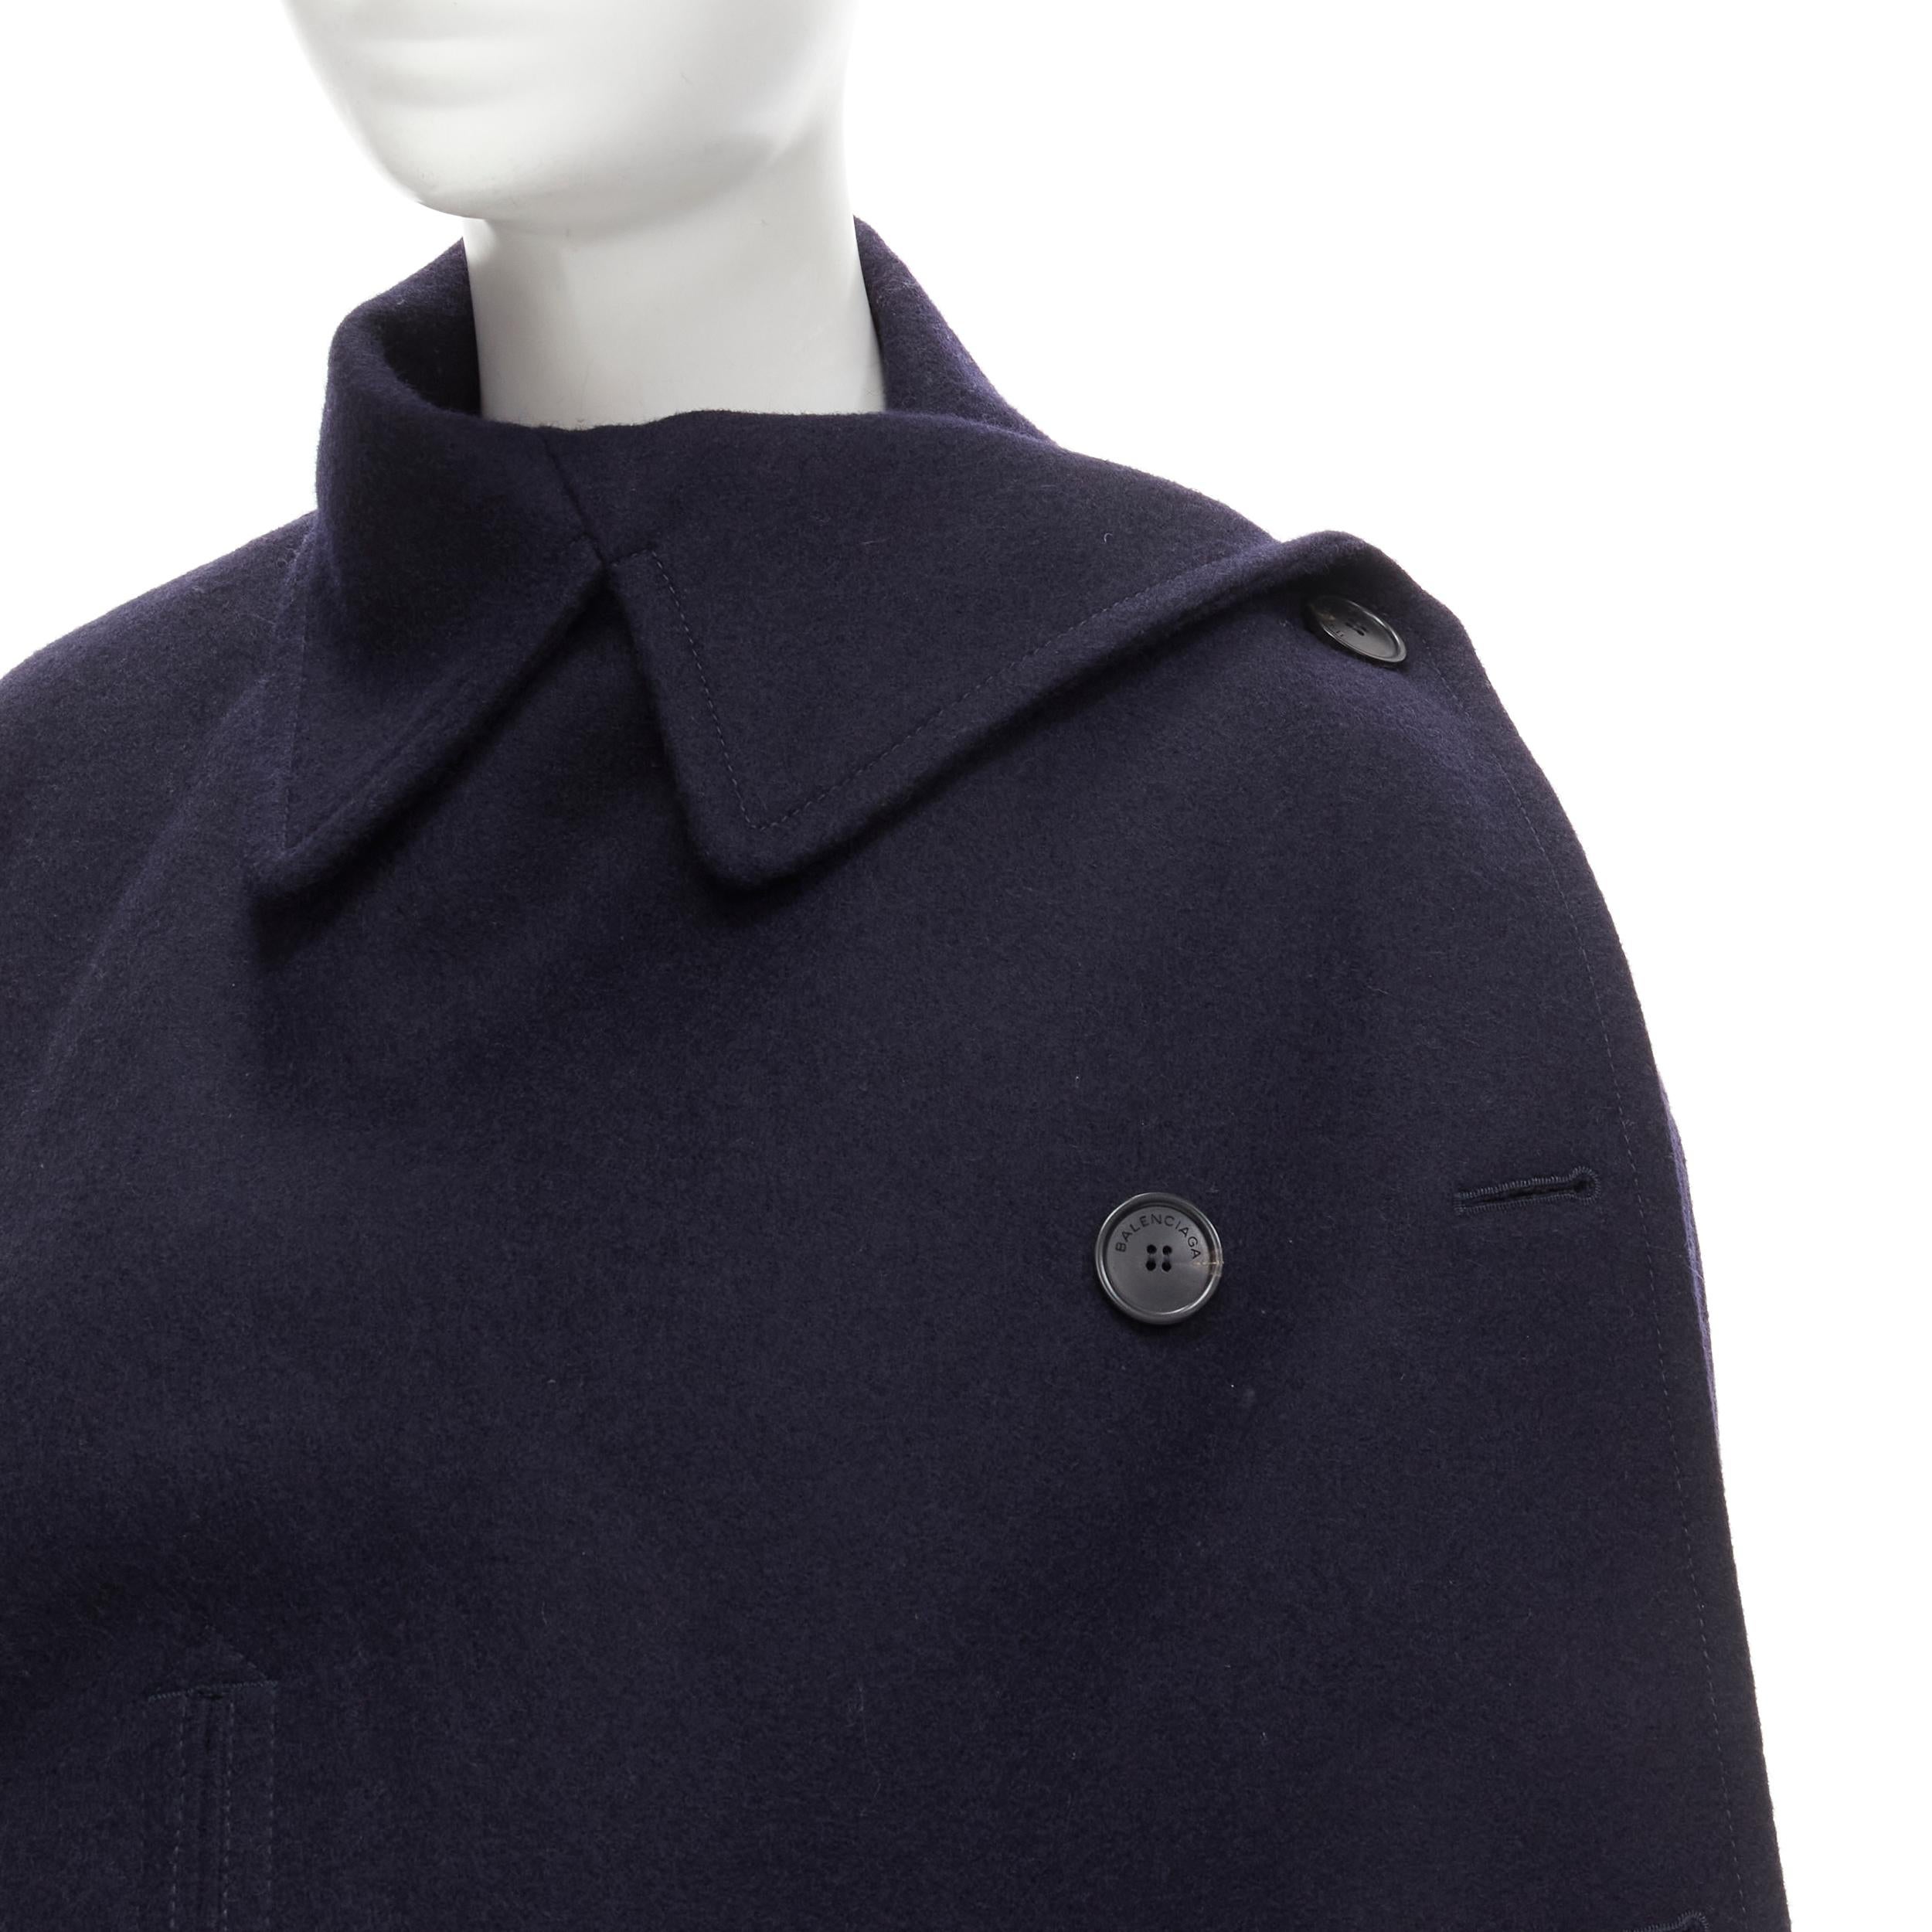 BALENCIAGA 2018 Wrap navy wool deconstructed double breasted coat M
Brand: Balenciaga
Designer: Demna
Collection: 2018 Wrap 
Material: Wool
Color: Navy
Pattern: Solid
Closure: Button
Extra Detail: Asymmetric cut with single button at shoulder